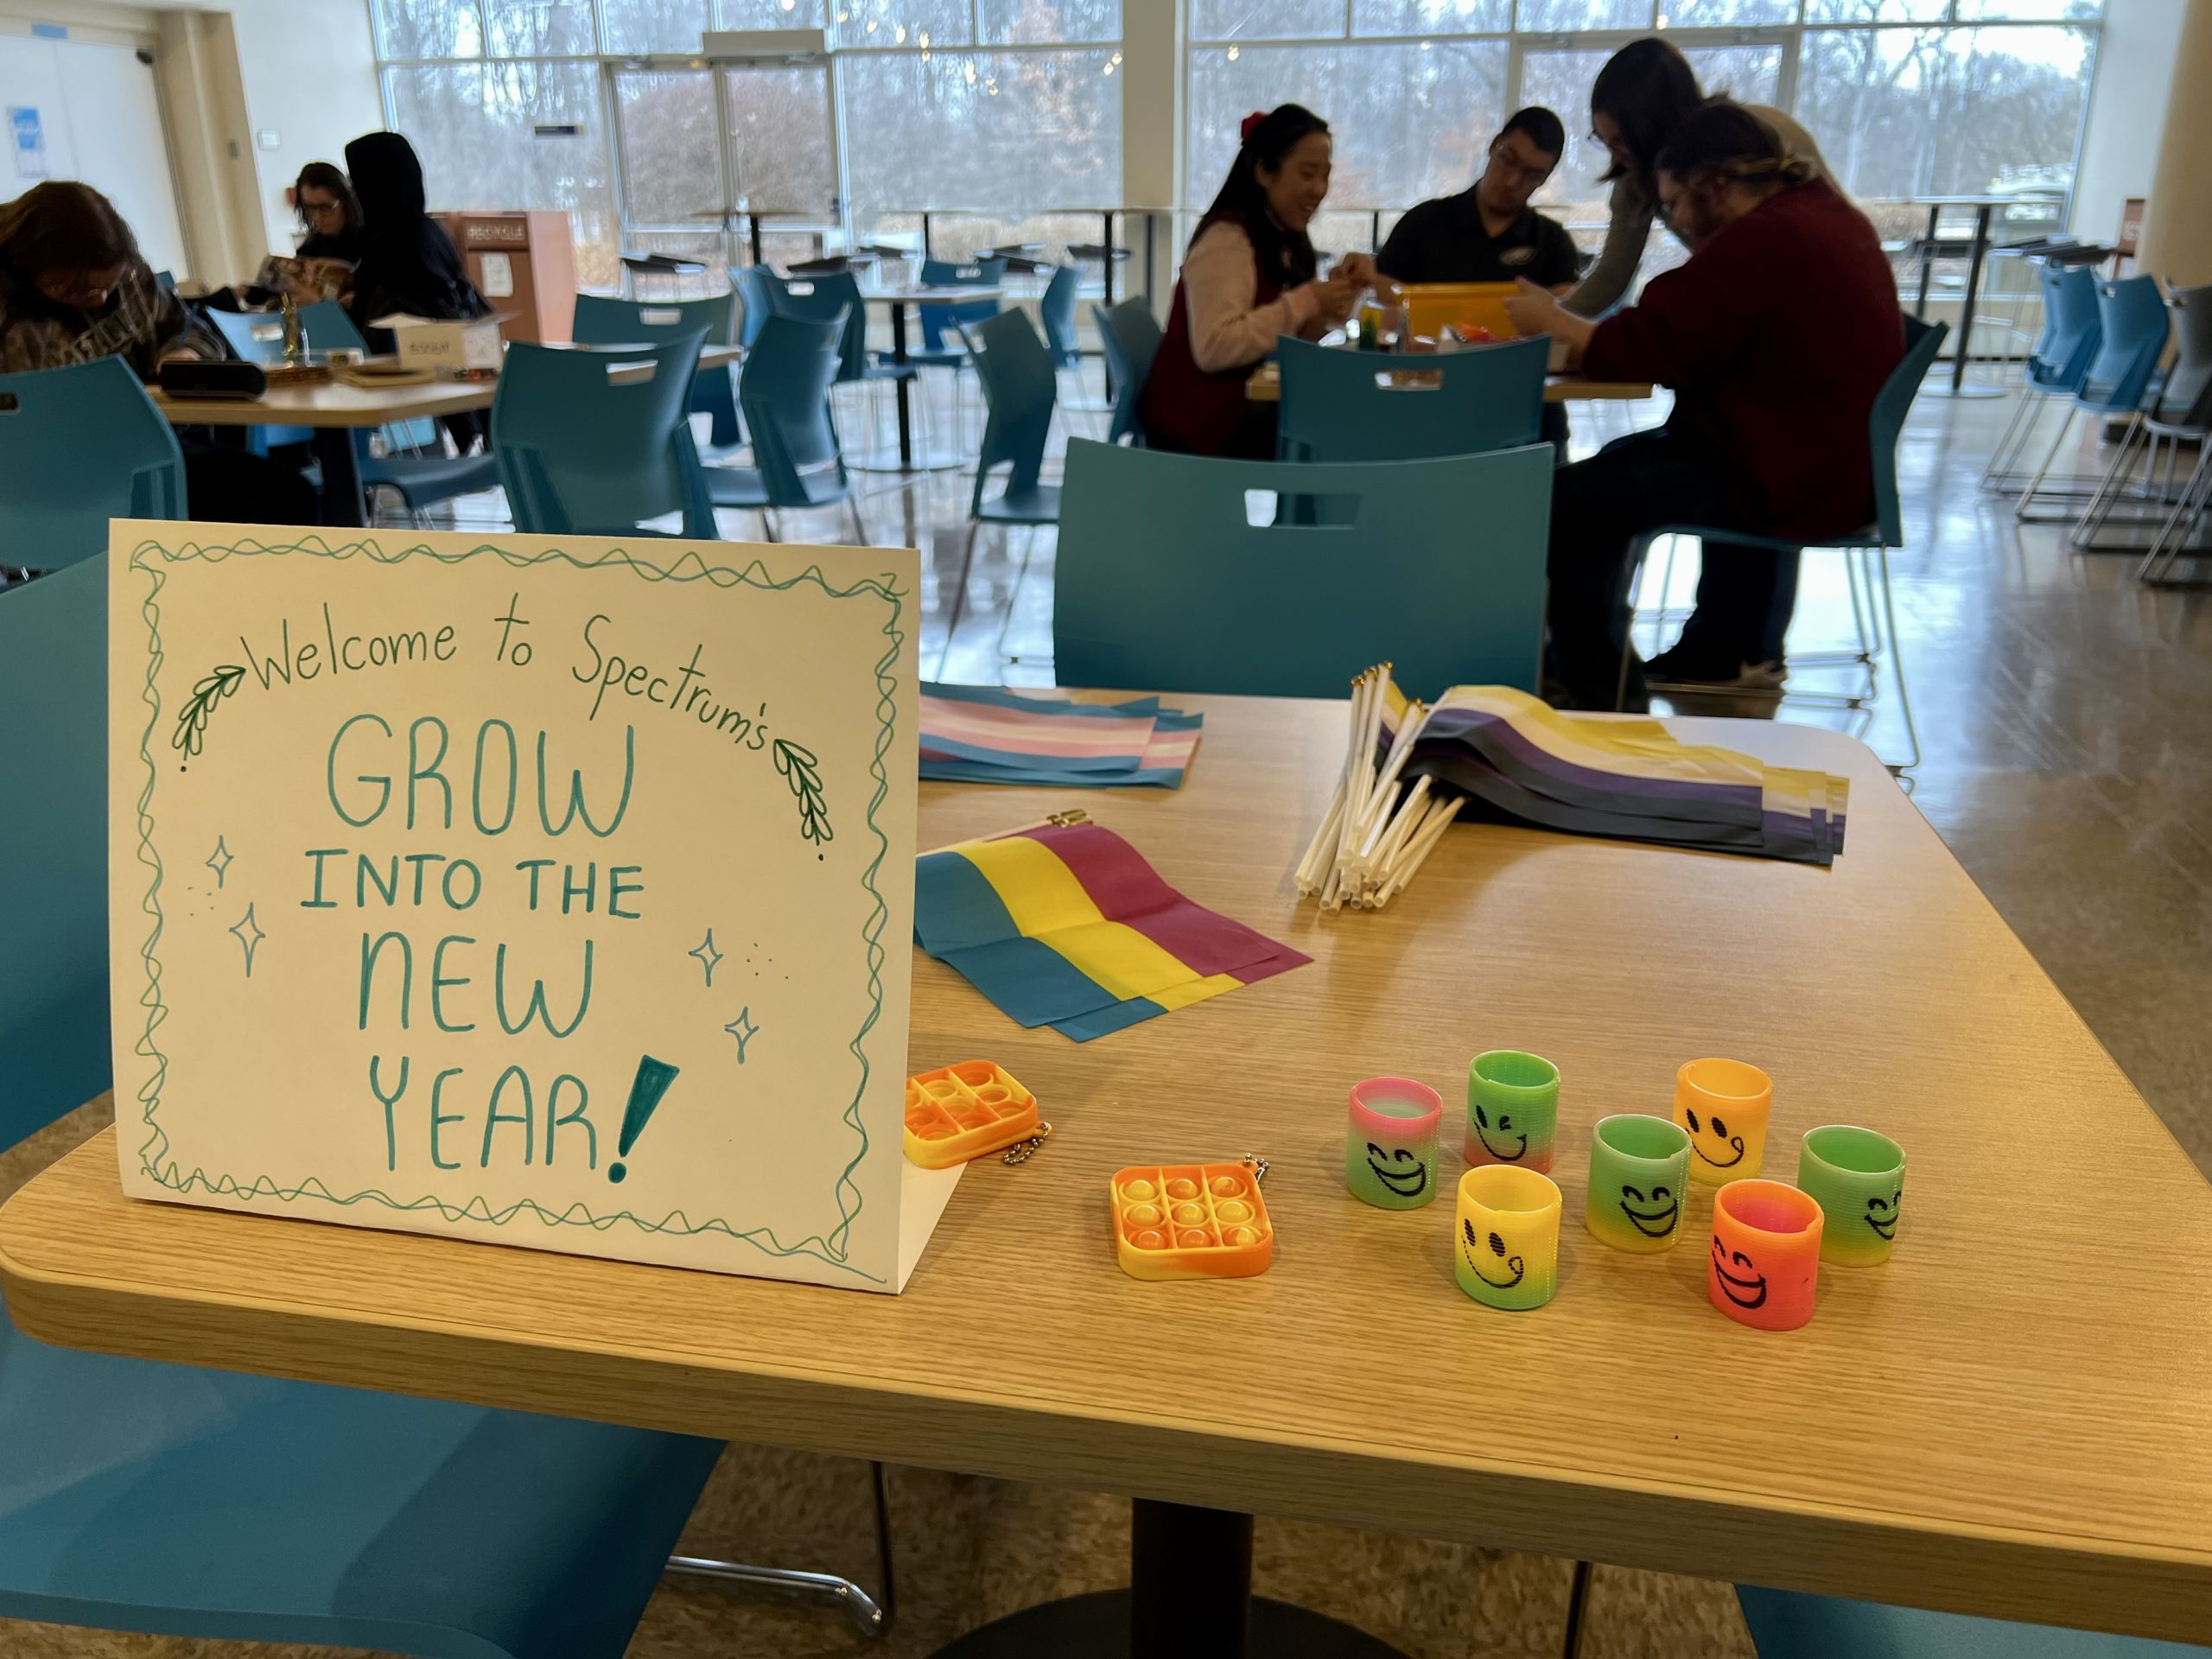 Spectrum's event titled, "Grow into the New Year" with activities for students to enjoy! Photo by Micah Balobalo.